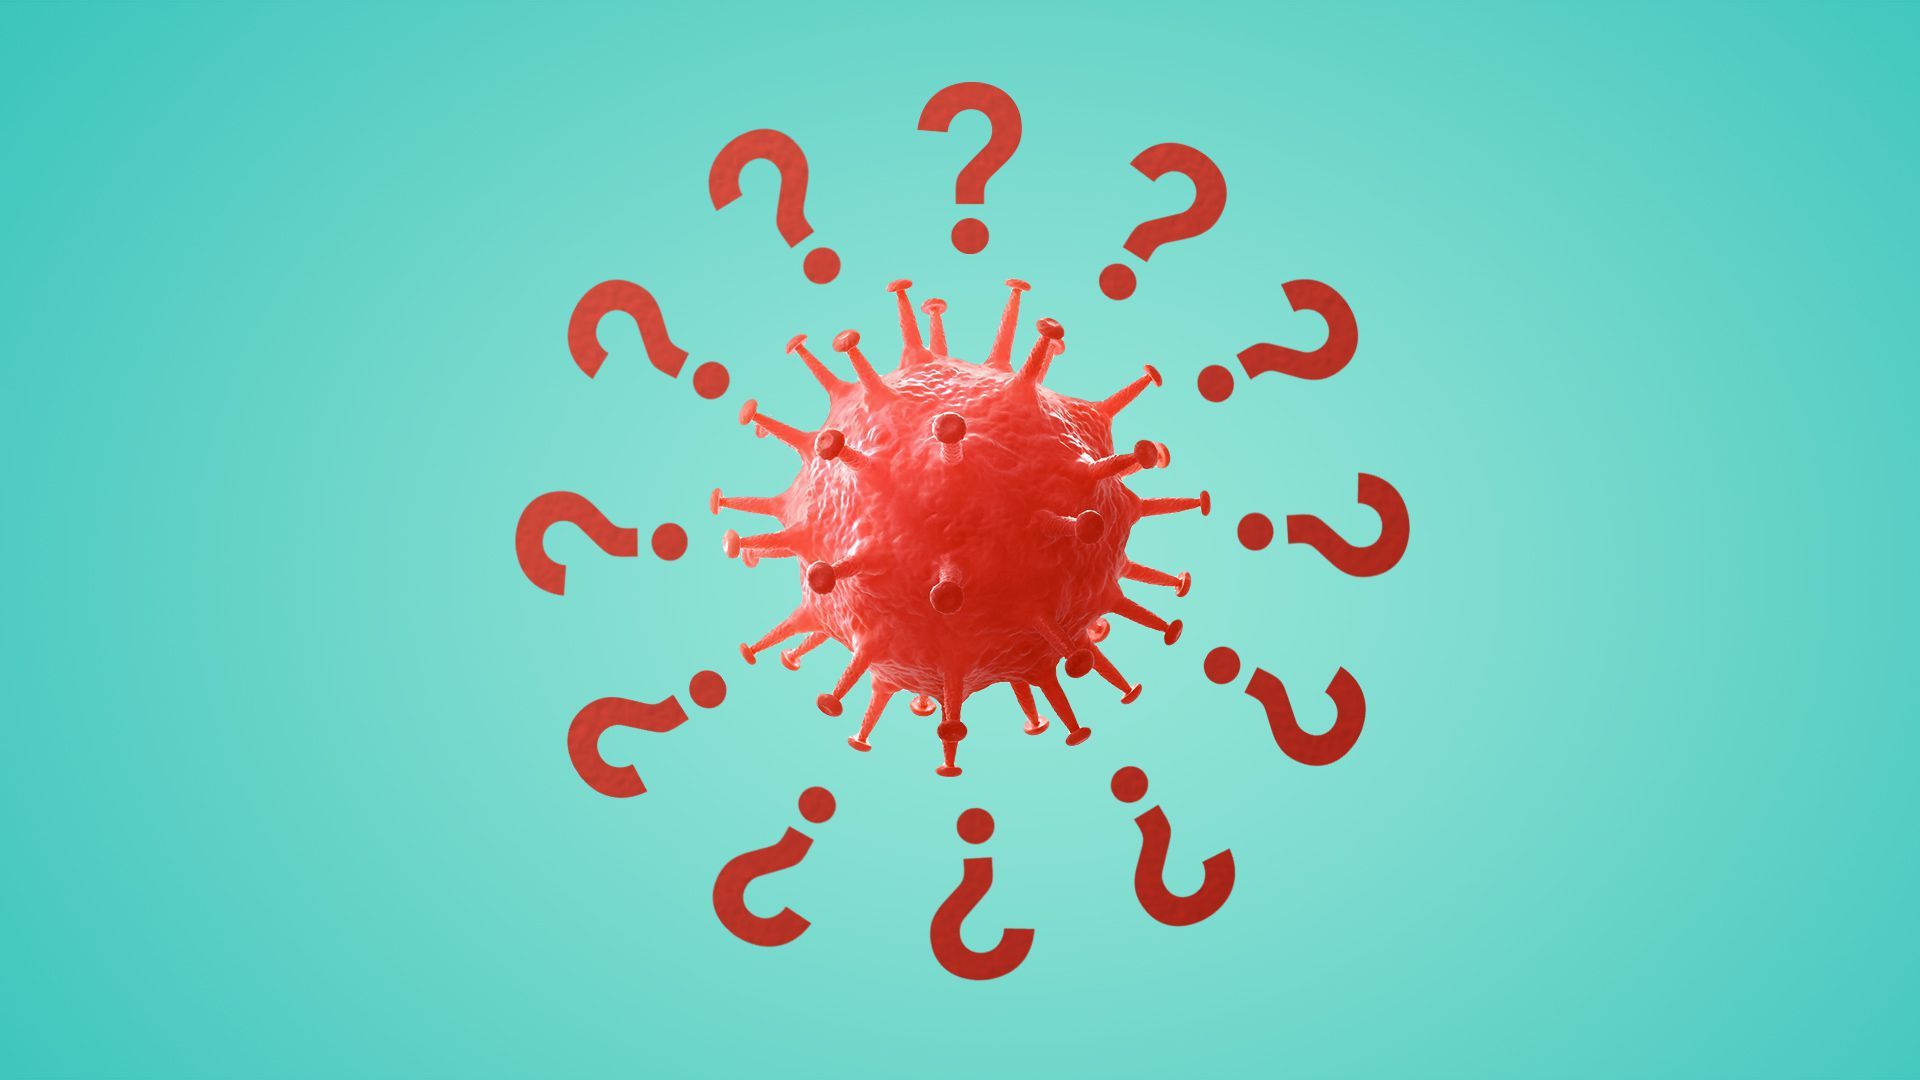 A coronavirus cell with question marks surrounding it over a blue background.